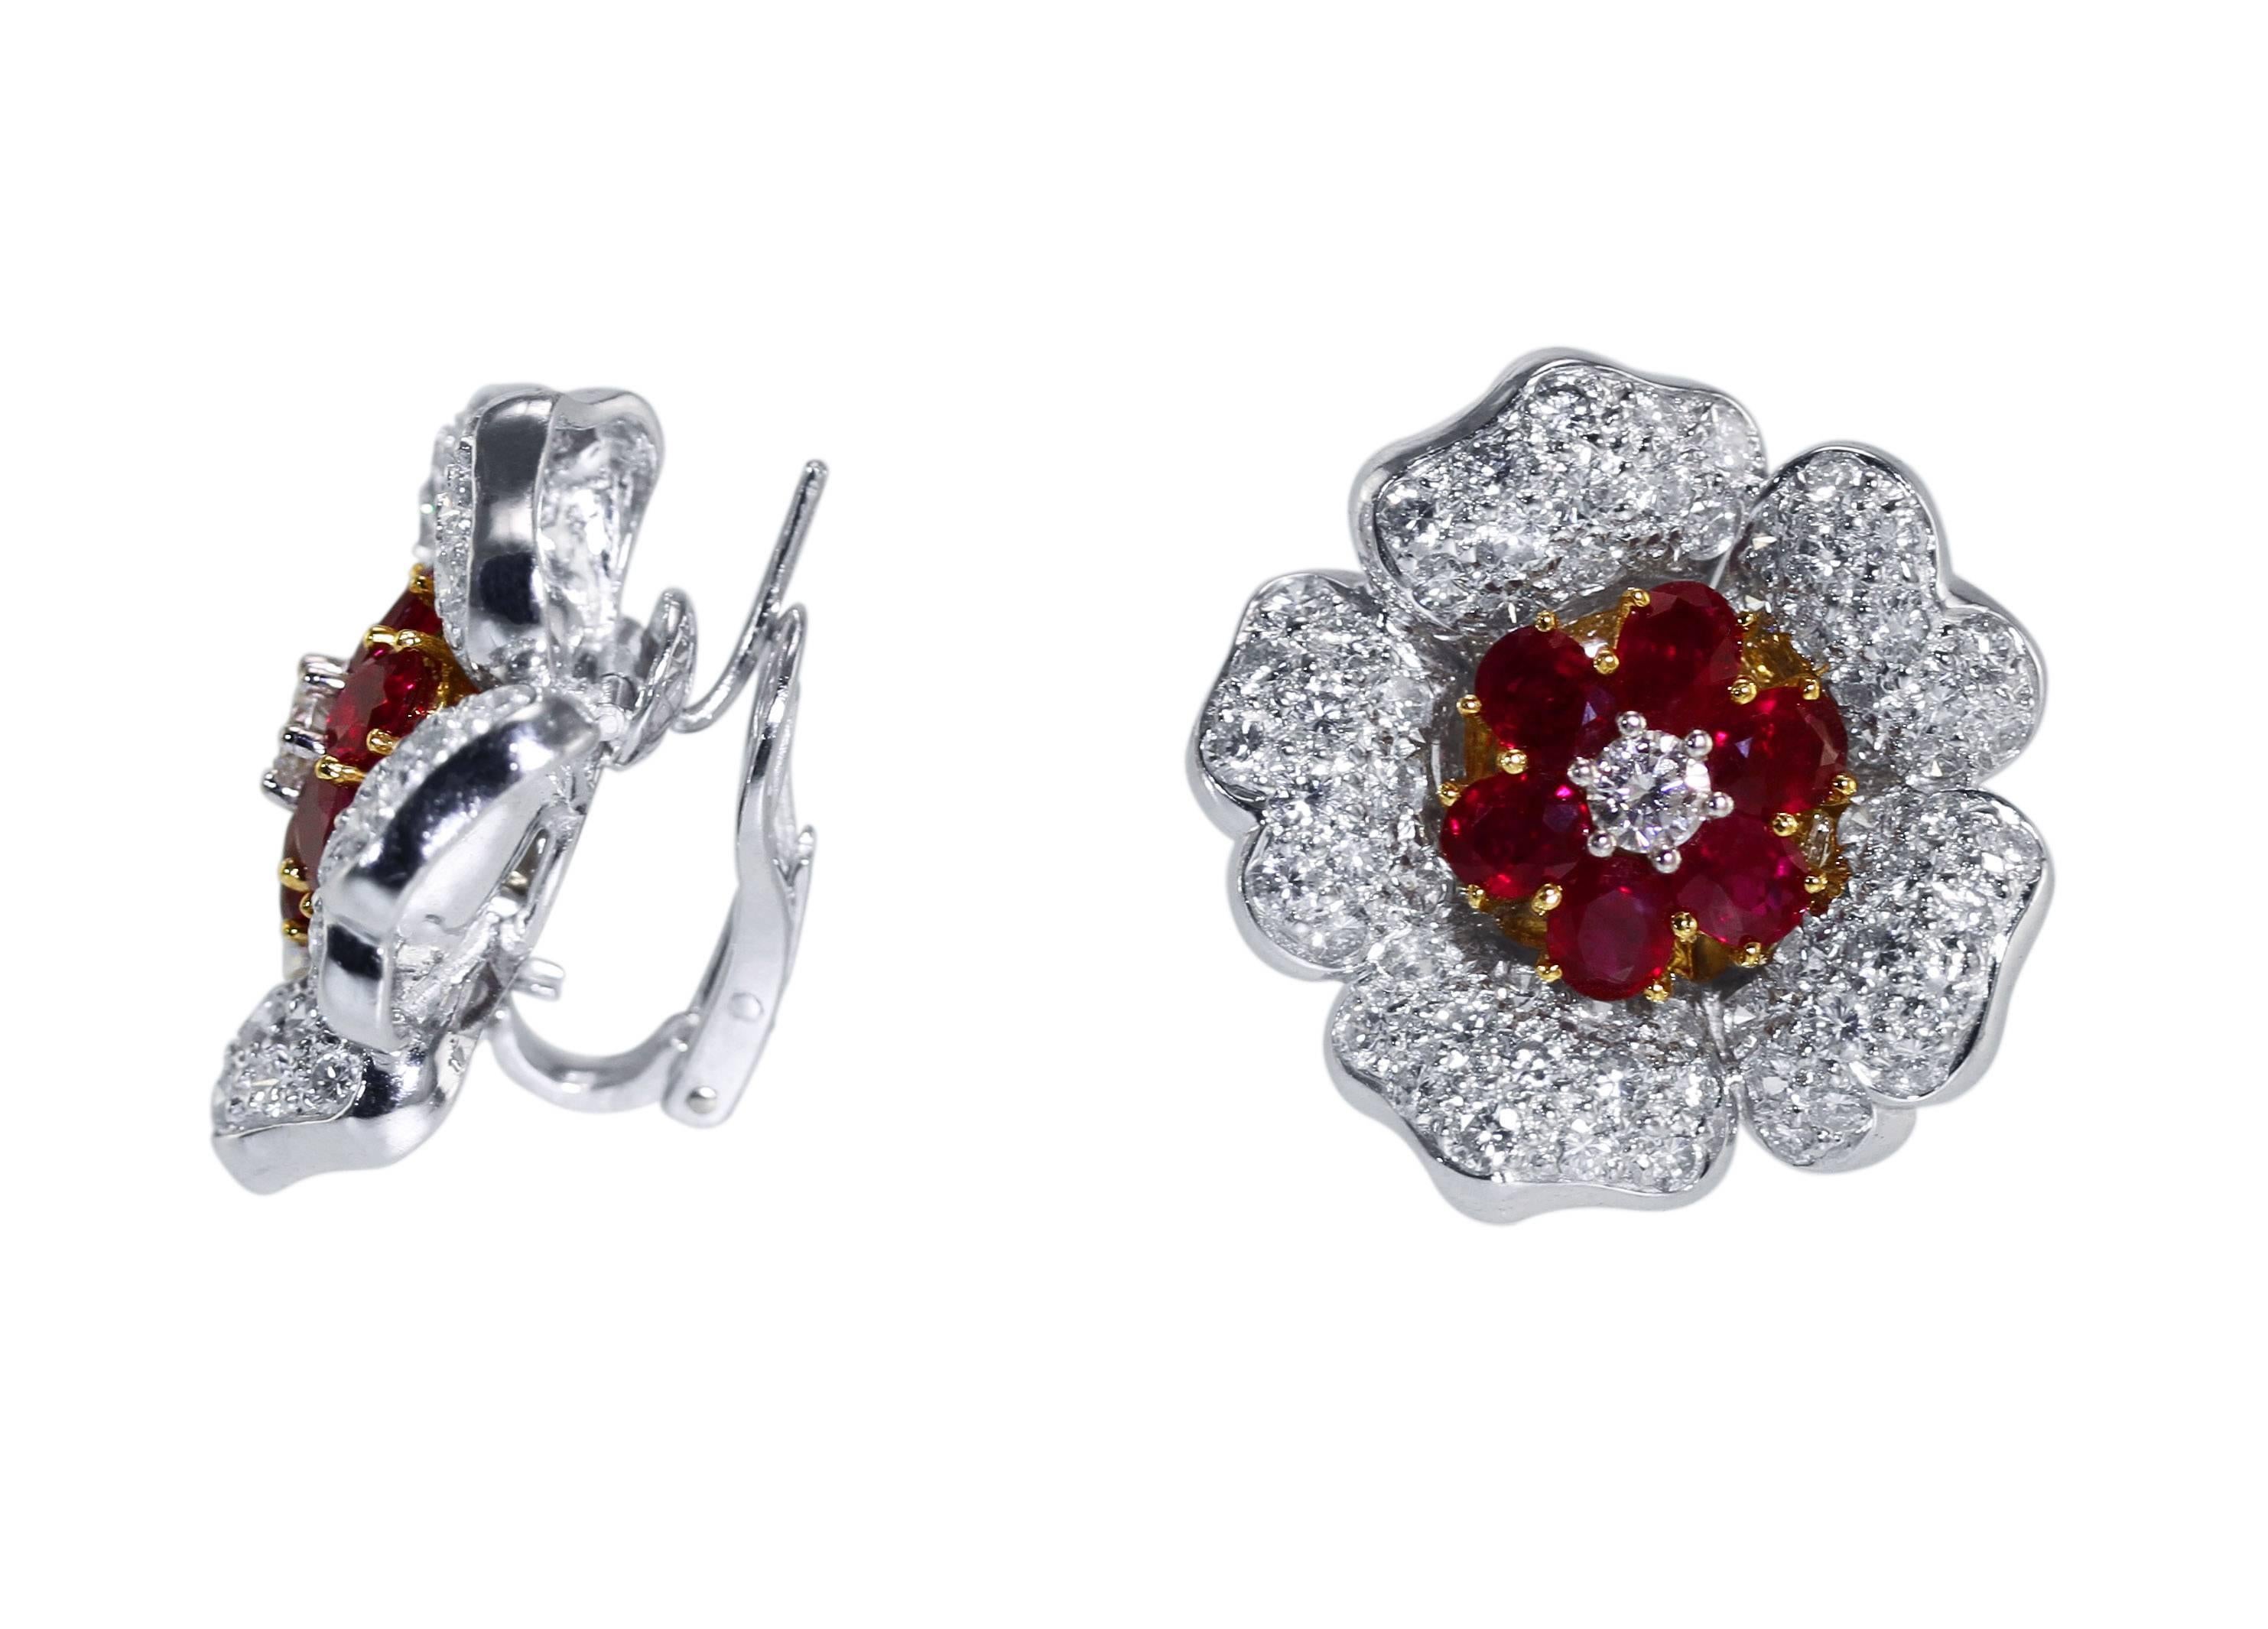 A pair of Platinum, 18 karat gold, ruby and diamond earclips, designed as flowerheads set in the center with 10 oval rubies weighing approximately 5.00 carats, further set with 128 round diamonds weighing approximately 6.00 carats, measuring 1 by 1